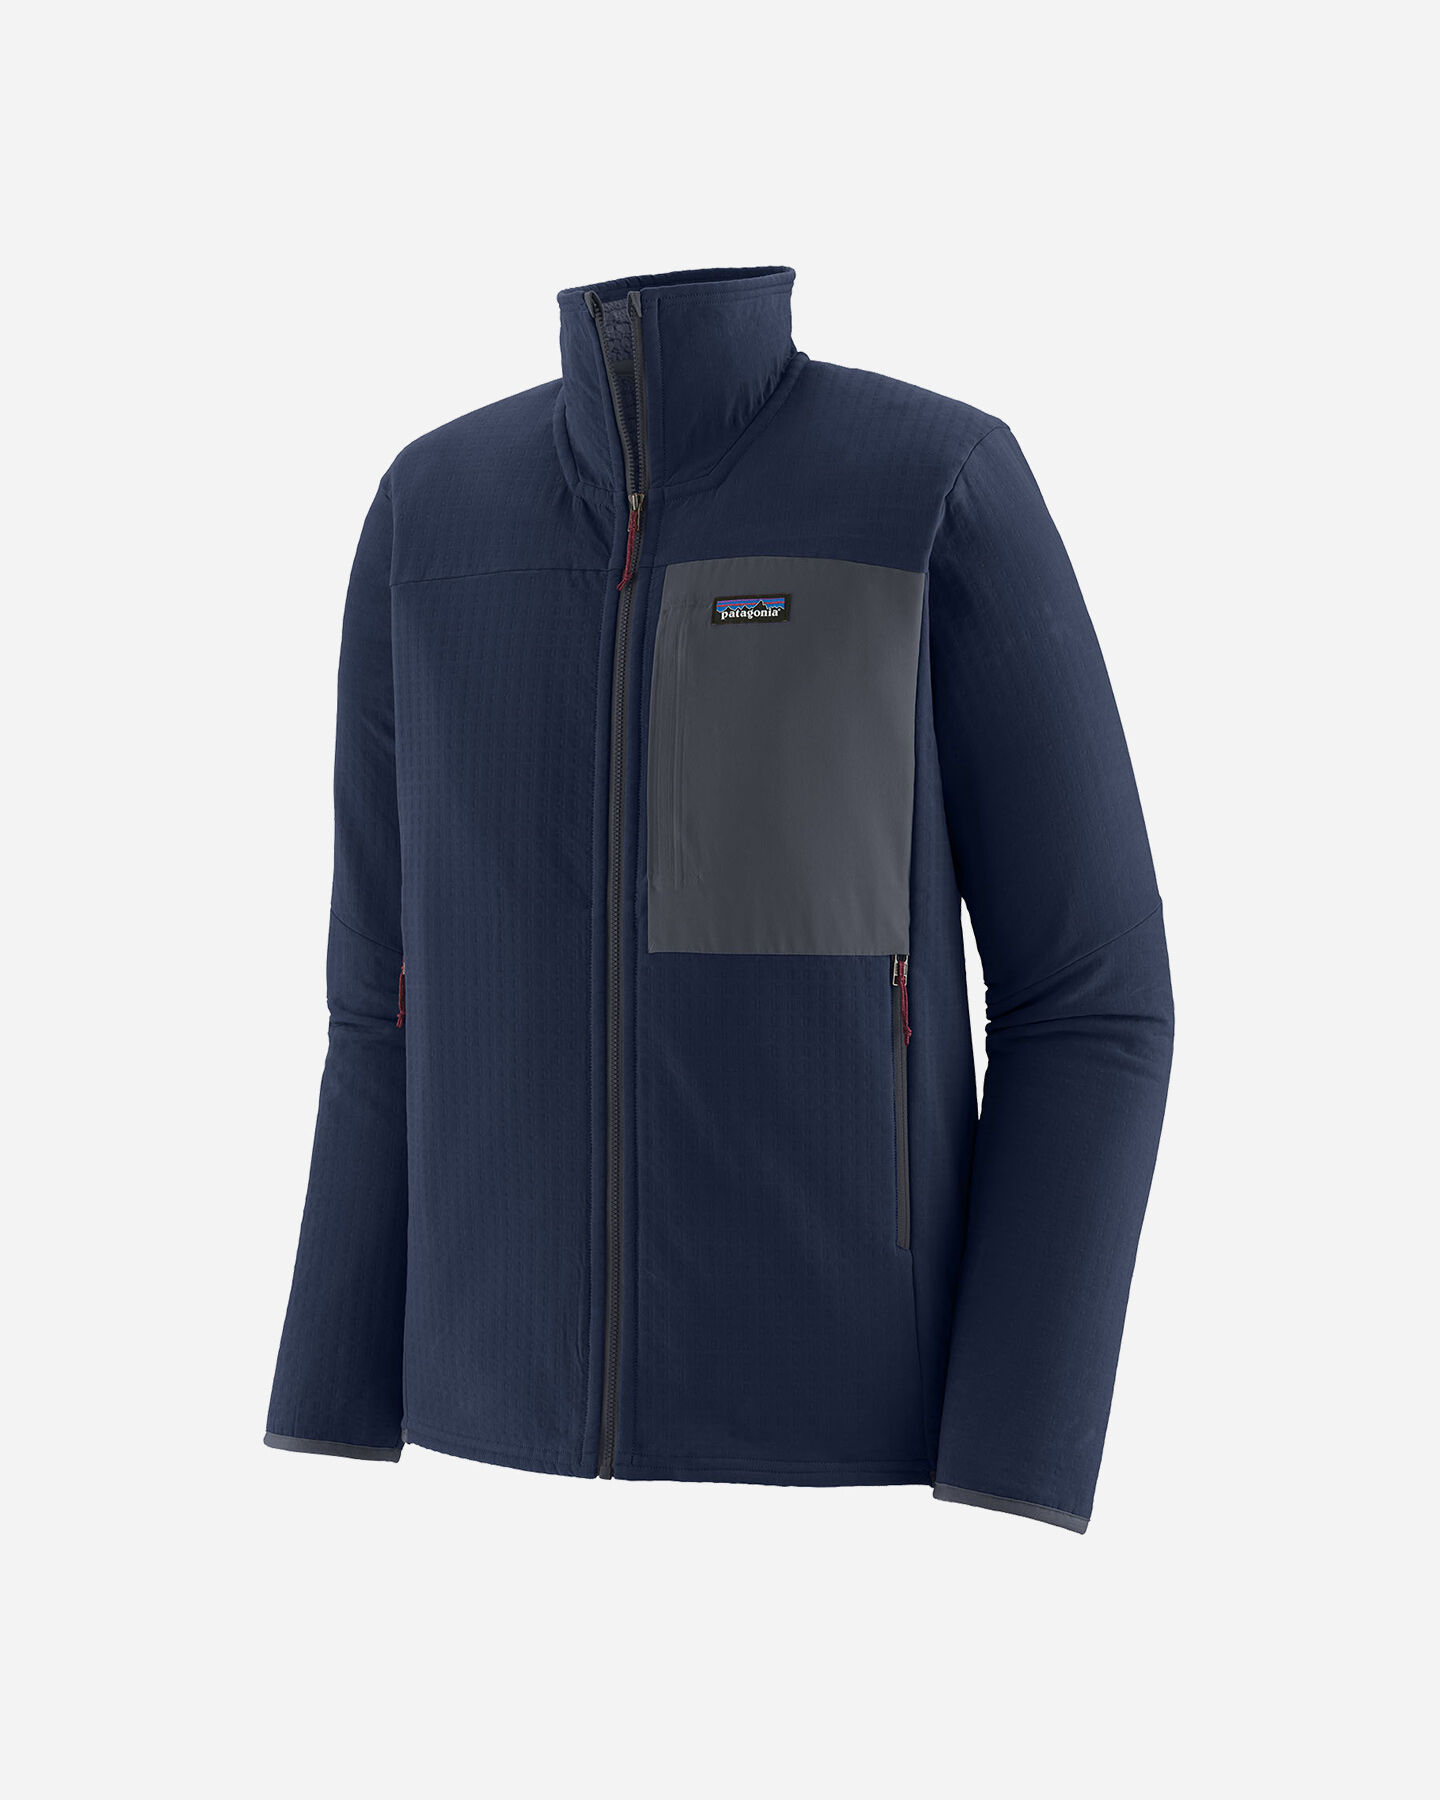  Pile PATAGONIA R2 TECH FACE M S5665566|NENA|XL scatto 0